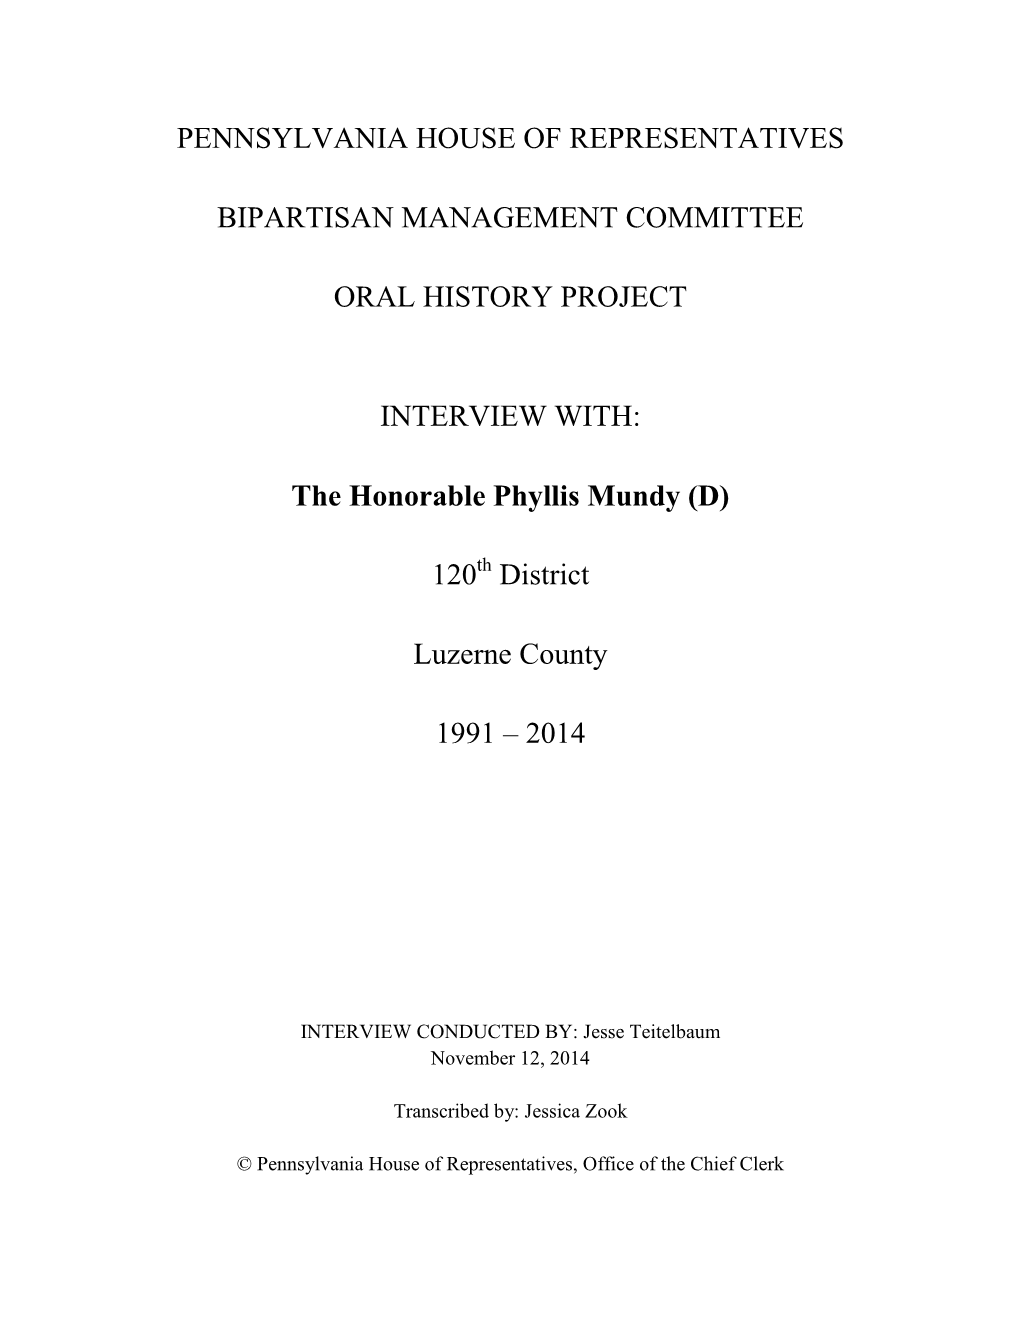 PENNSYLVANIA HOUSE of REPRESENTATIVES BIPARTISAN MANAGEMENT COMMITTEE ORAL HISTORY PROJECT INTERVIEW WITH: the Honorable Phyllis